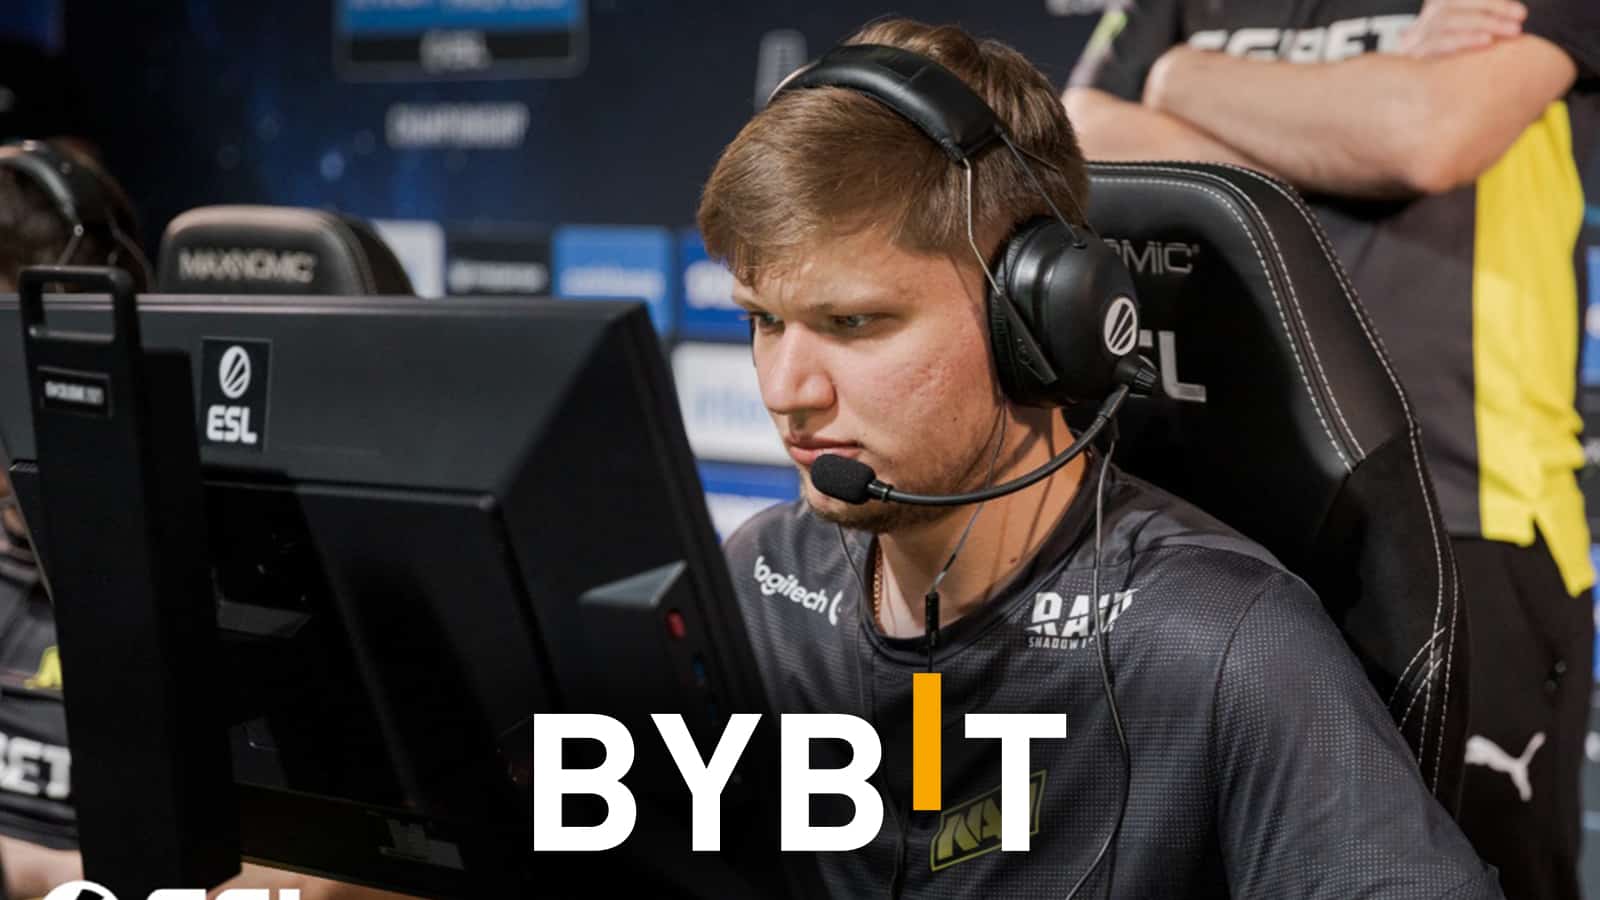 s1mple playing for NAVI